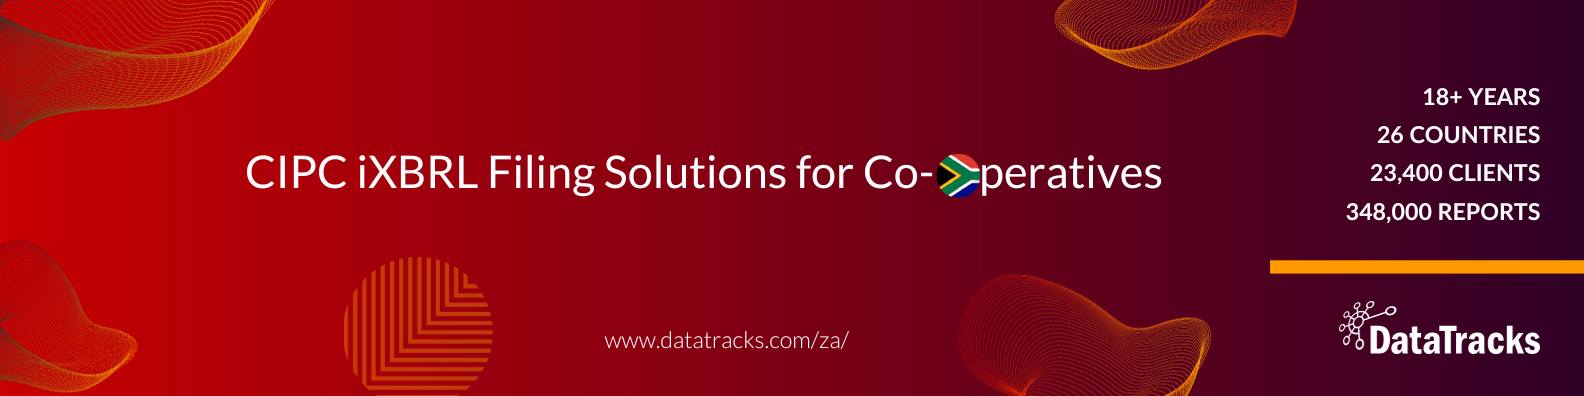 CIPC iXBRL filing solution for Co-ops in South Africa _ DataTracks